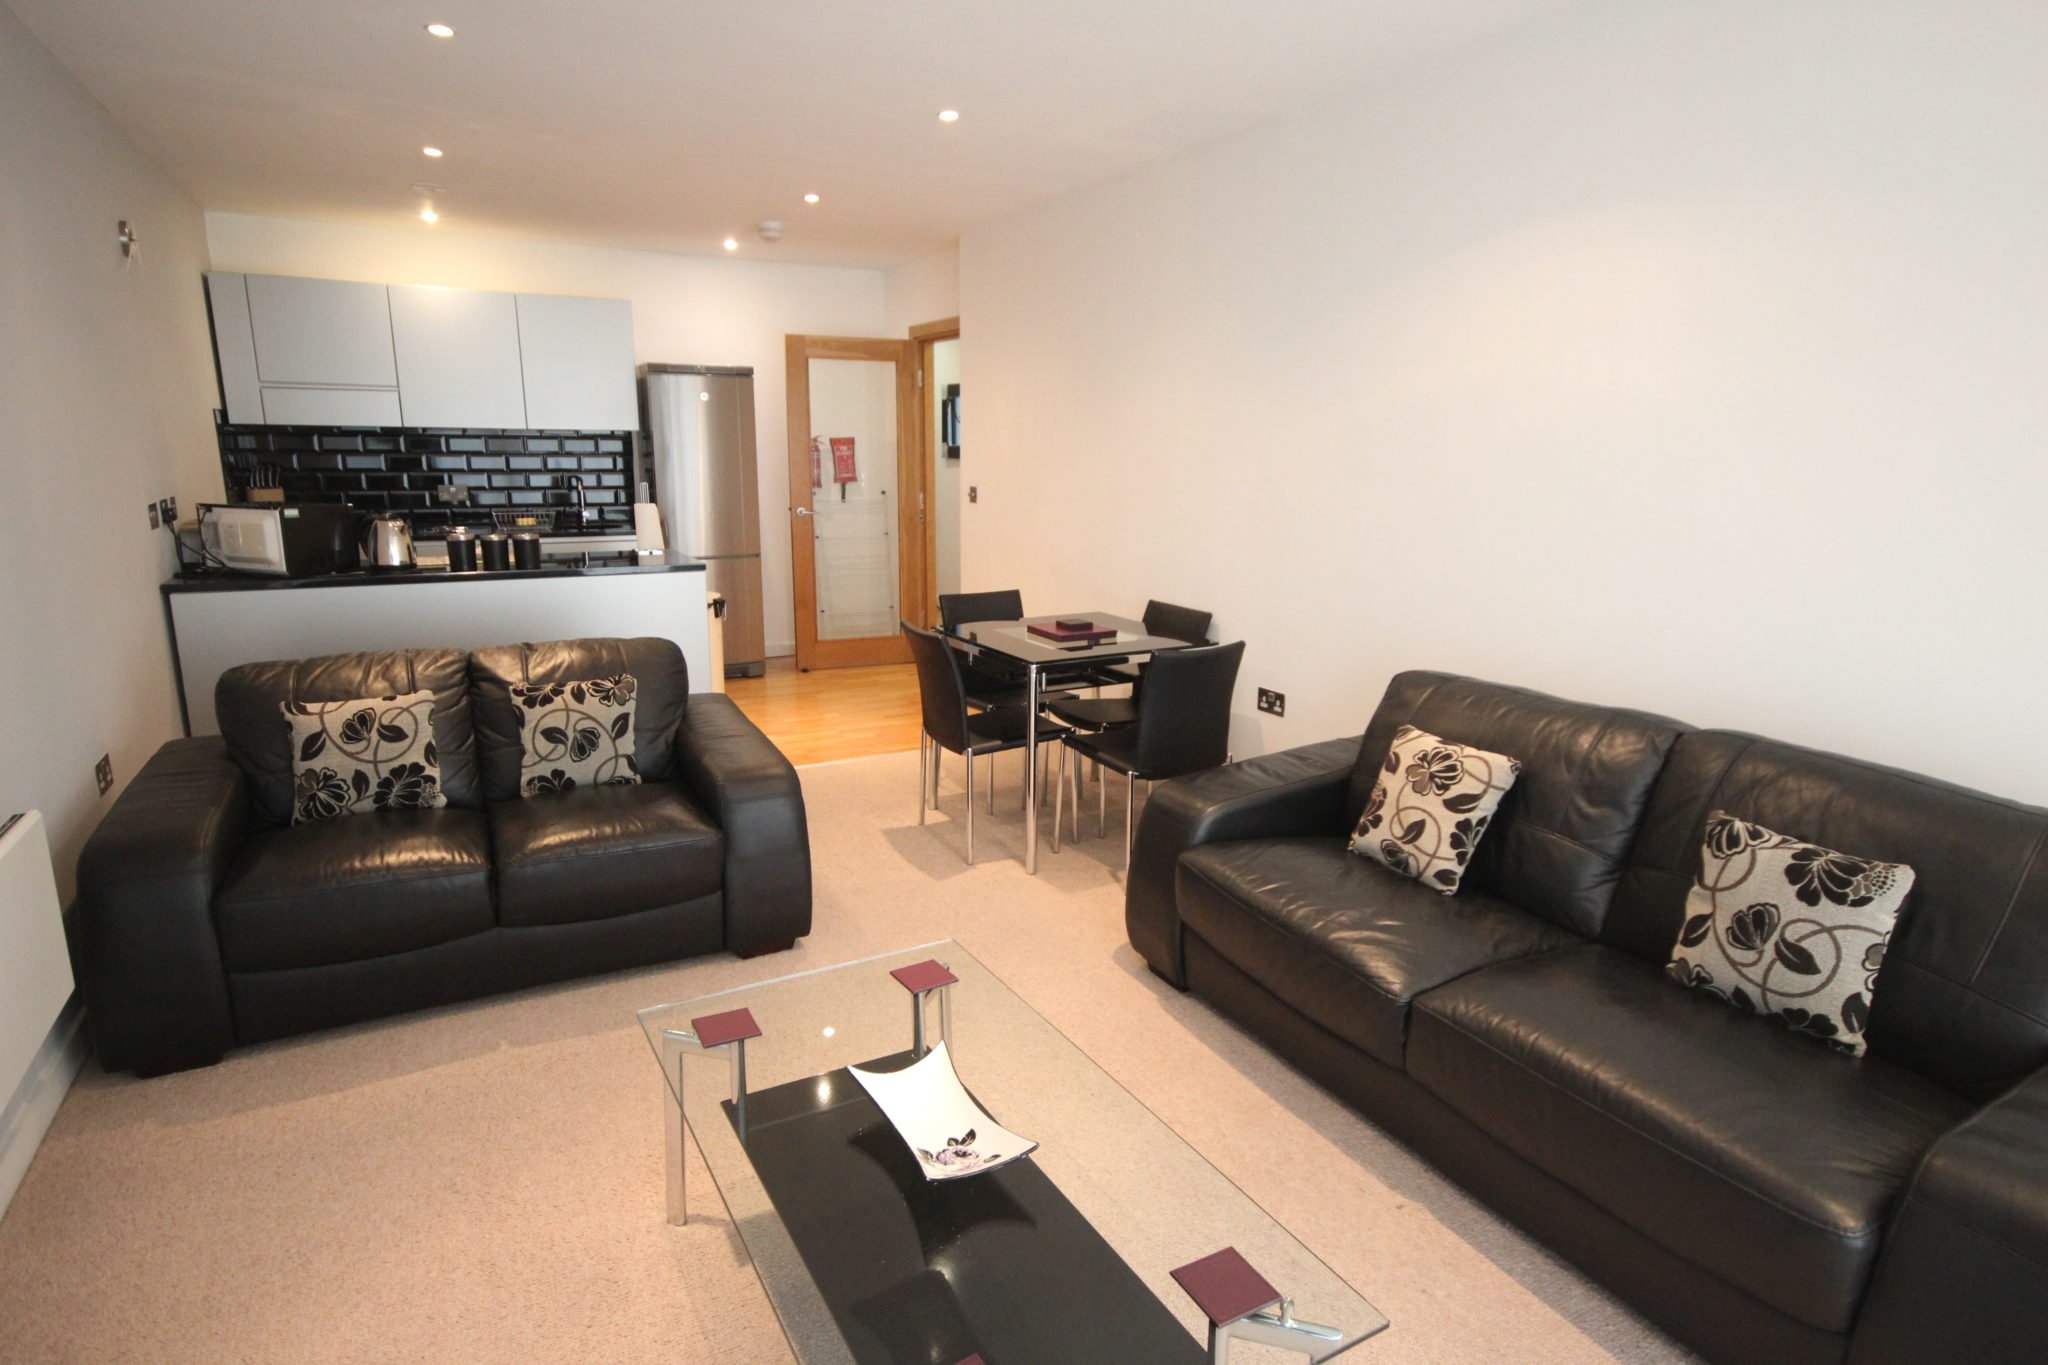 Luxury-Apartments-Newcastle-UK-available-Now-for-Short-Lets!-Book-Fully-Furnished-&-Serviced-Apartments-in-Central-Newcastle-for-cheaper-than-a-Hotel!-Urban-Stay